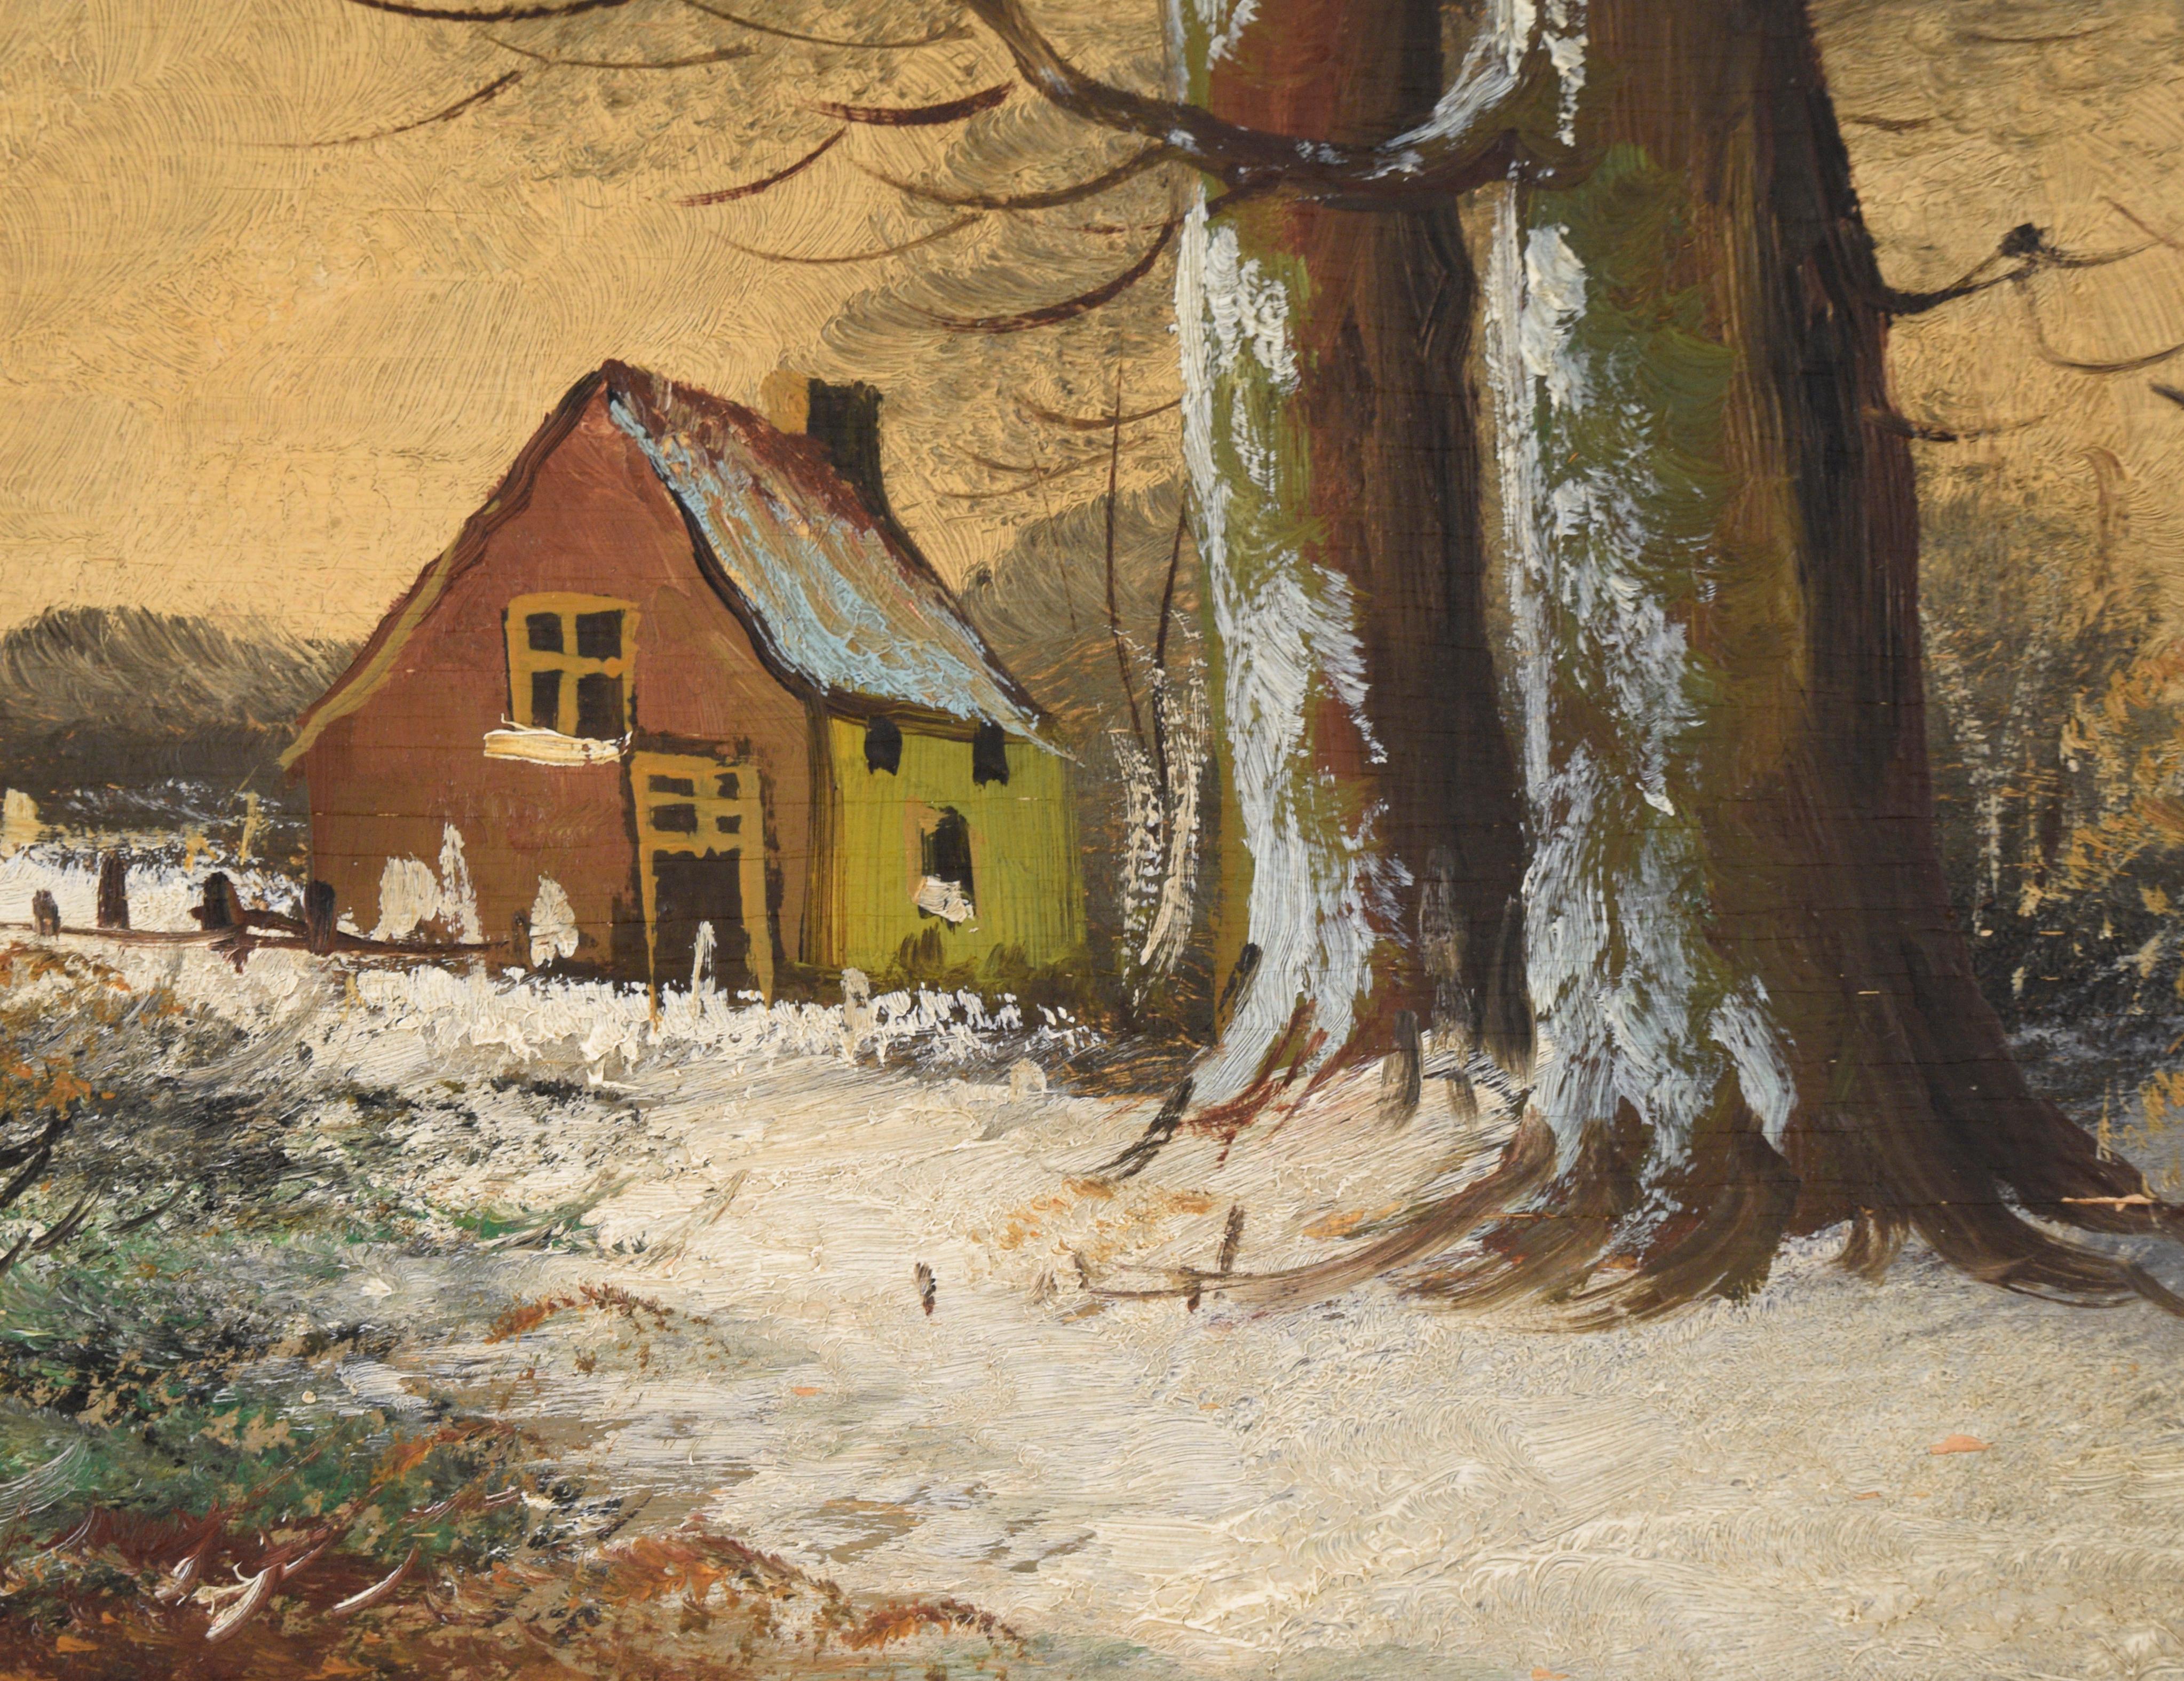 Serene winter landscape by an unknown artist. A dusting of freshly fallen snow covers the landscape. Two large trees are in the forefront of the composition, with a small farmhouse behind them. The sky is rendered in shades of grey and beige,